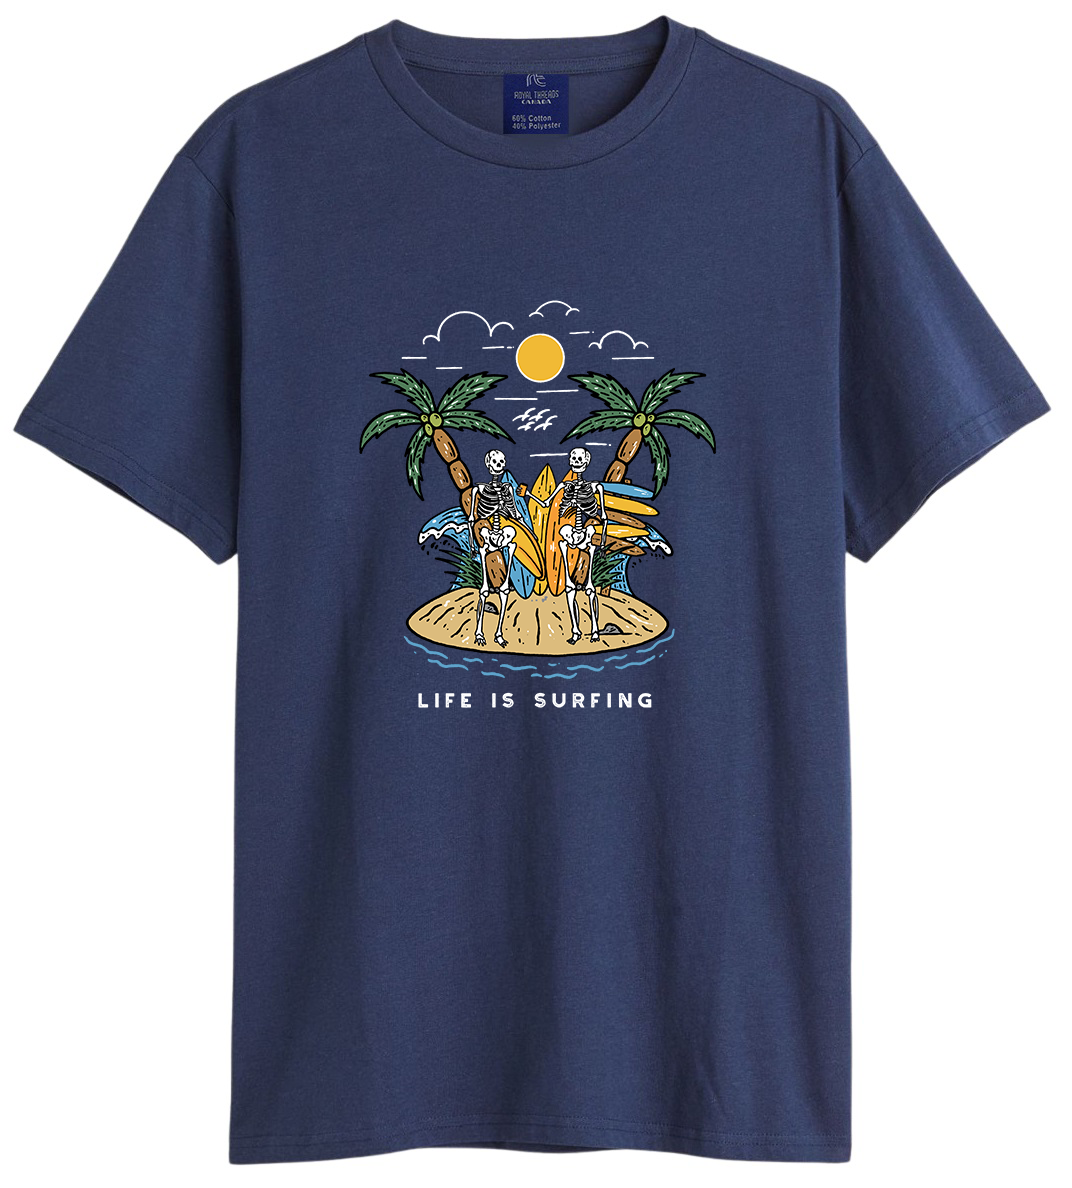 Men's Life is surfing Graphic Printed Cotton T Shirt